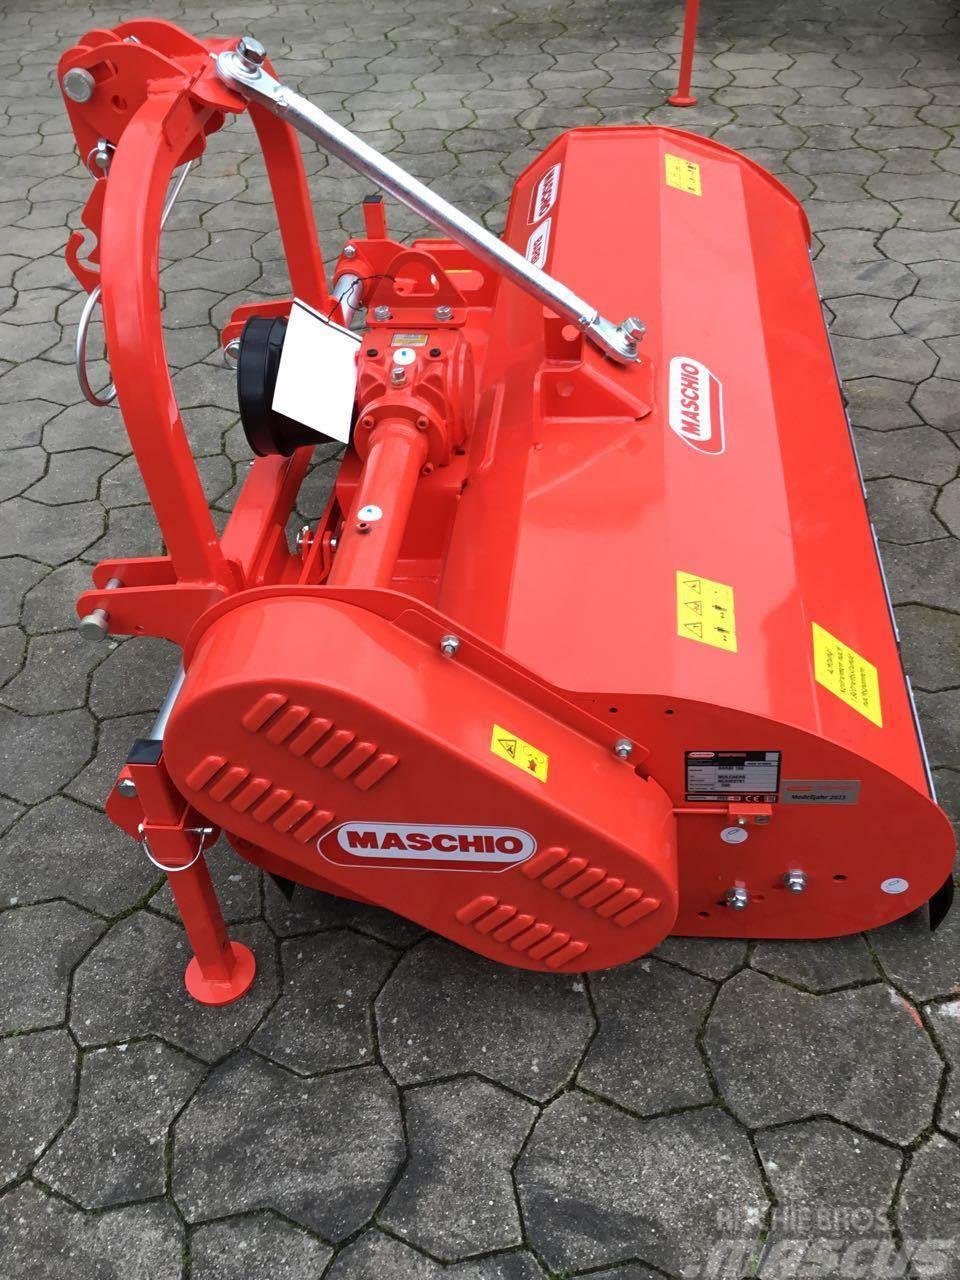 Maschio Barbi 160 Pasture mowers and toppers